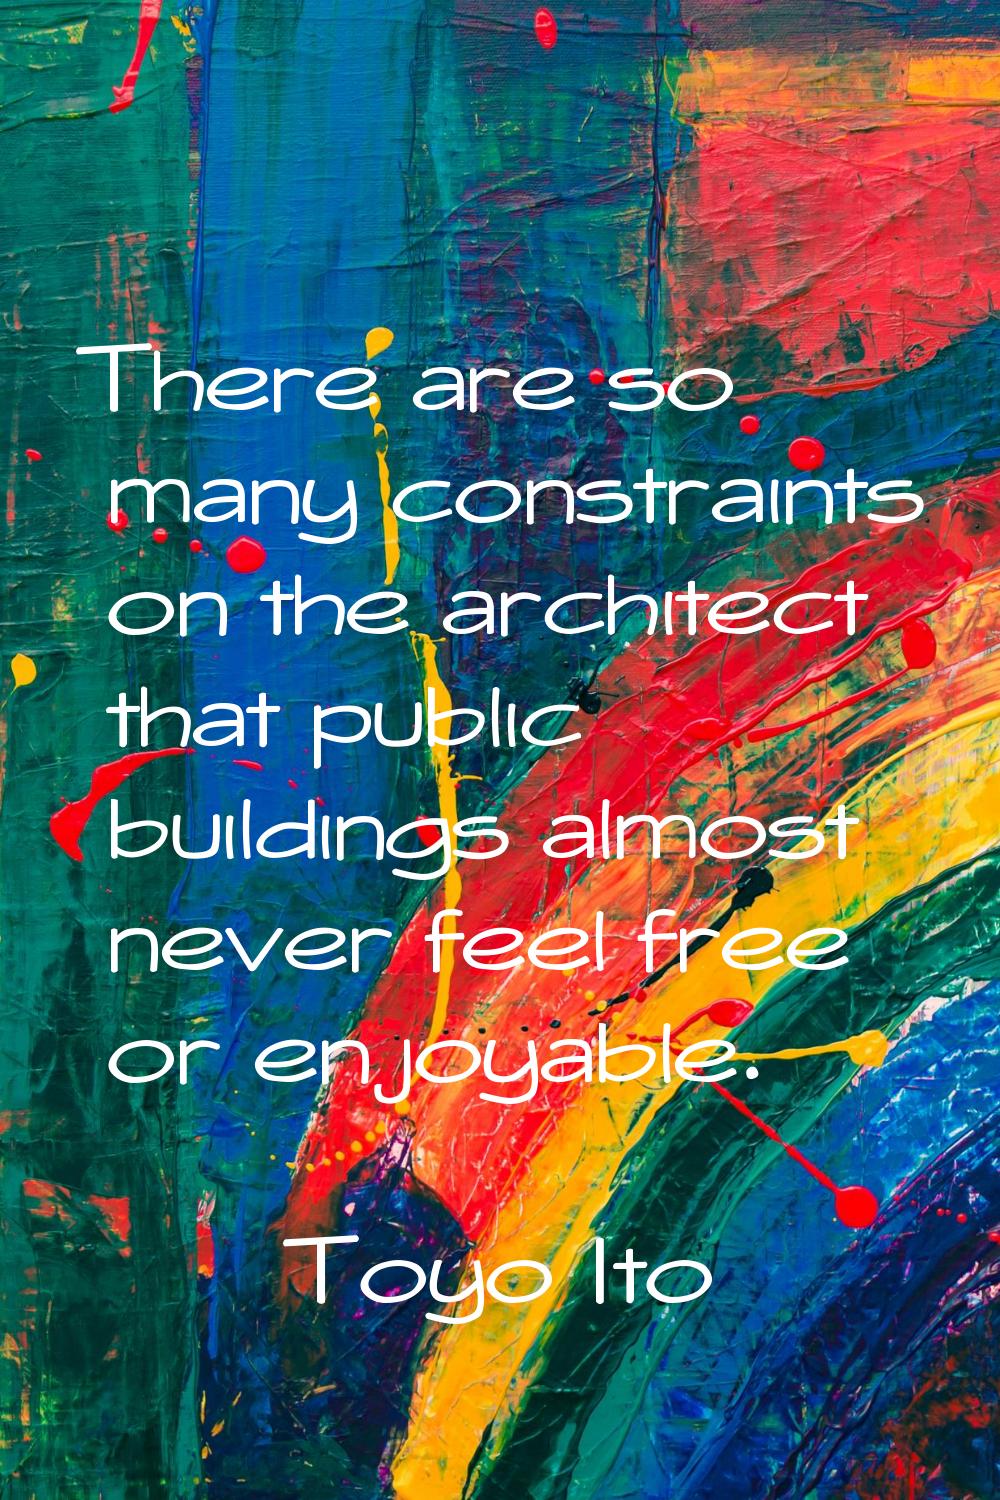 There are so many constraints on the architect that public buildings almost never feel free or enjo